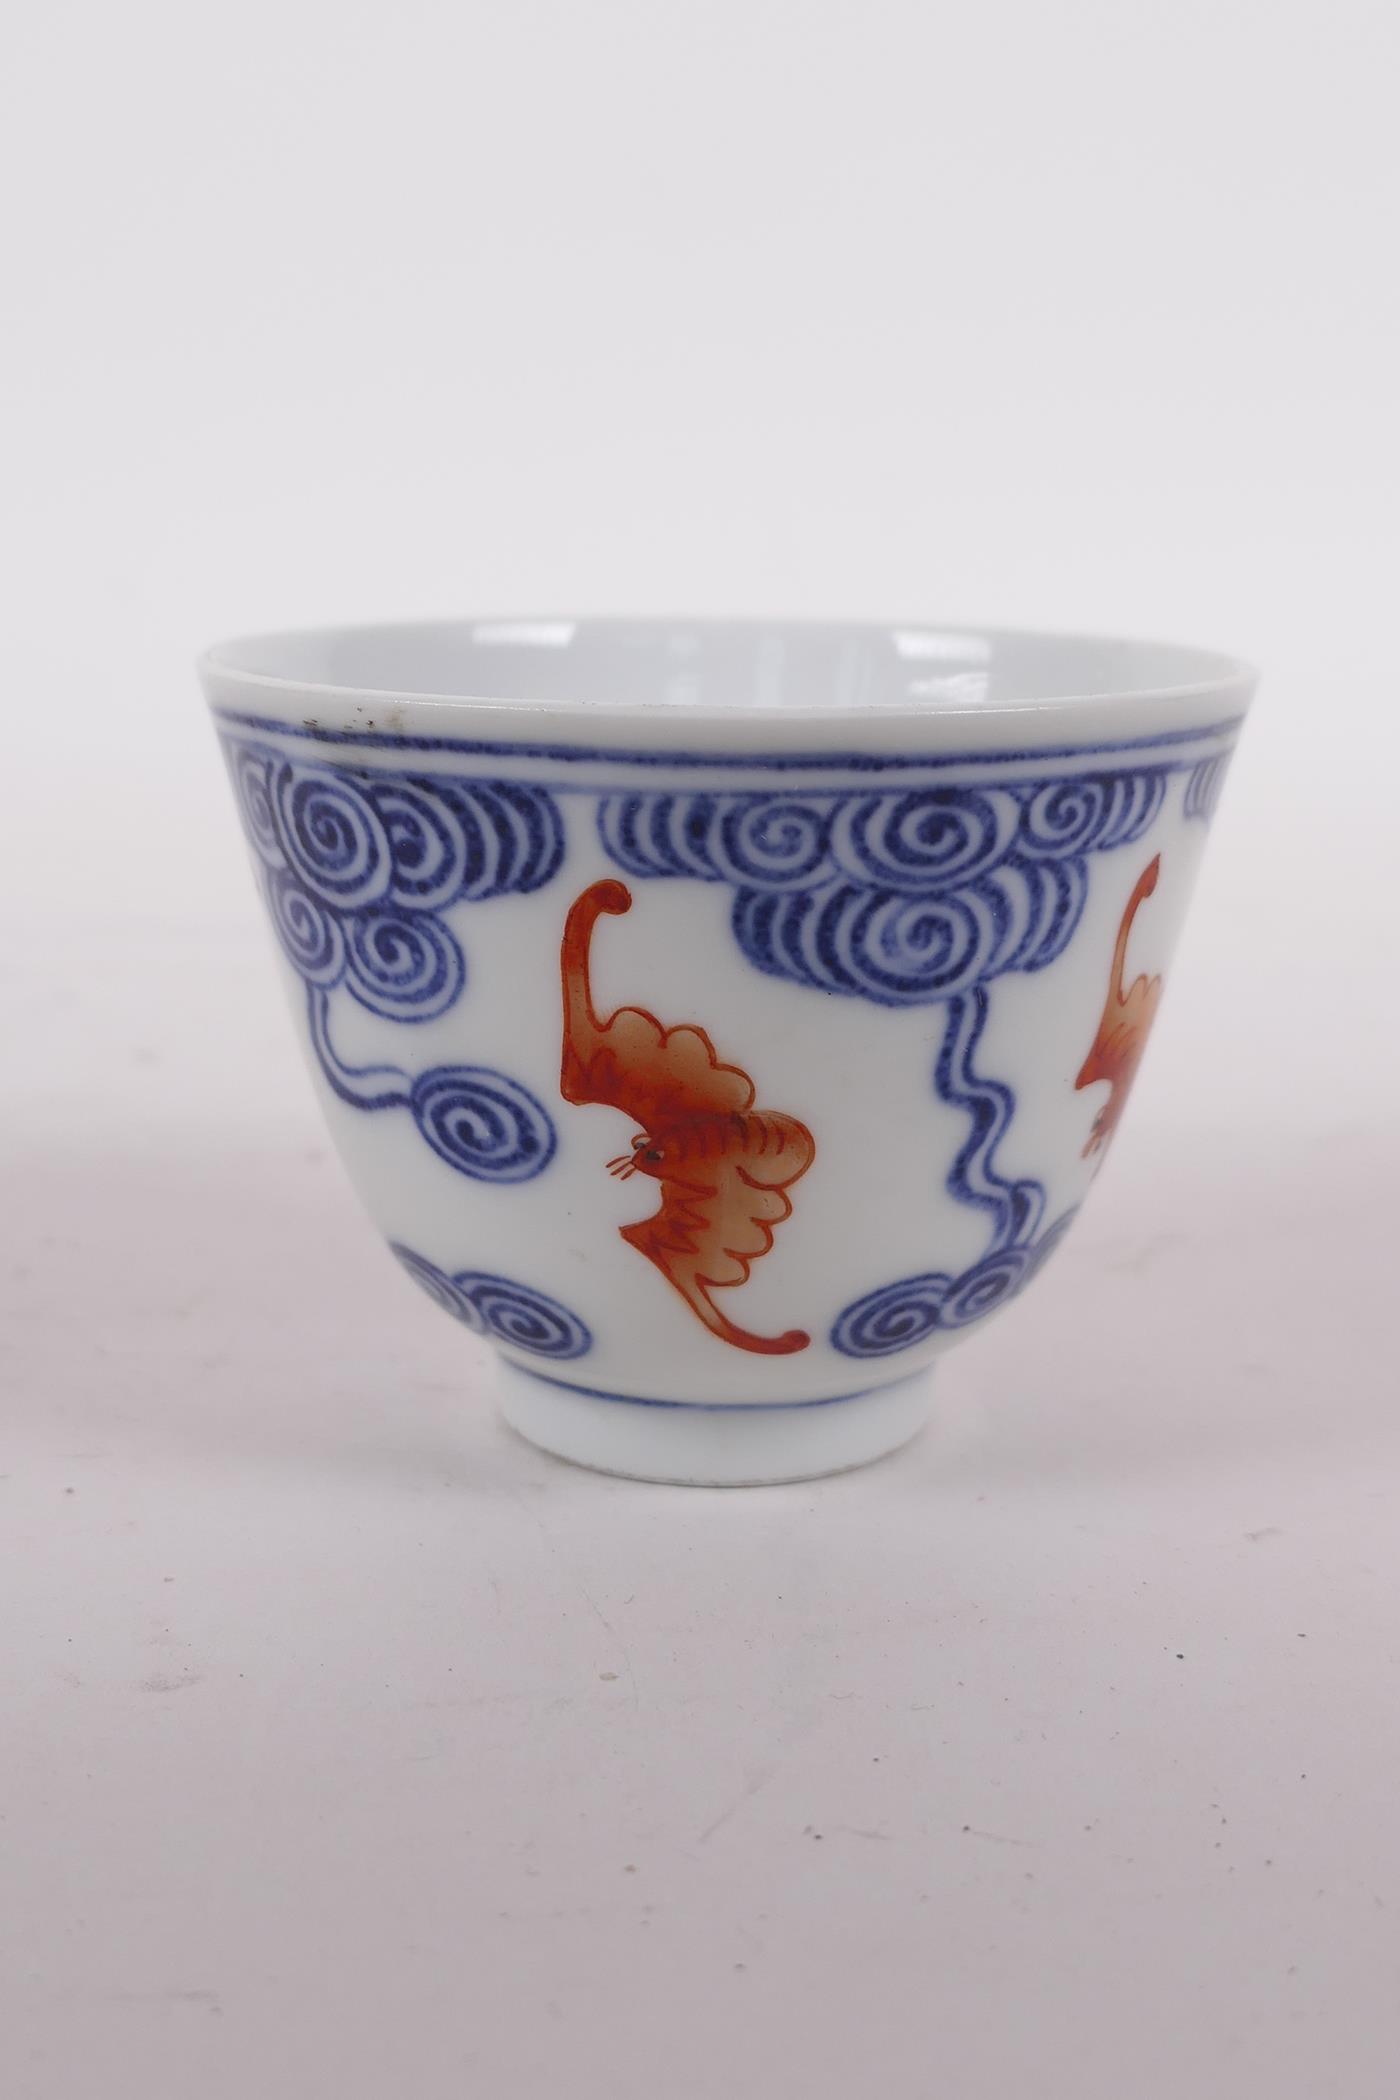 A Chinese blue and white porcelain tea bowl with iron red bat decoration, Quing six character mark